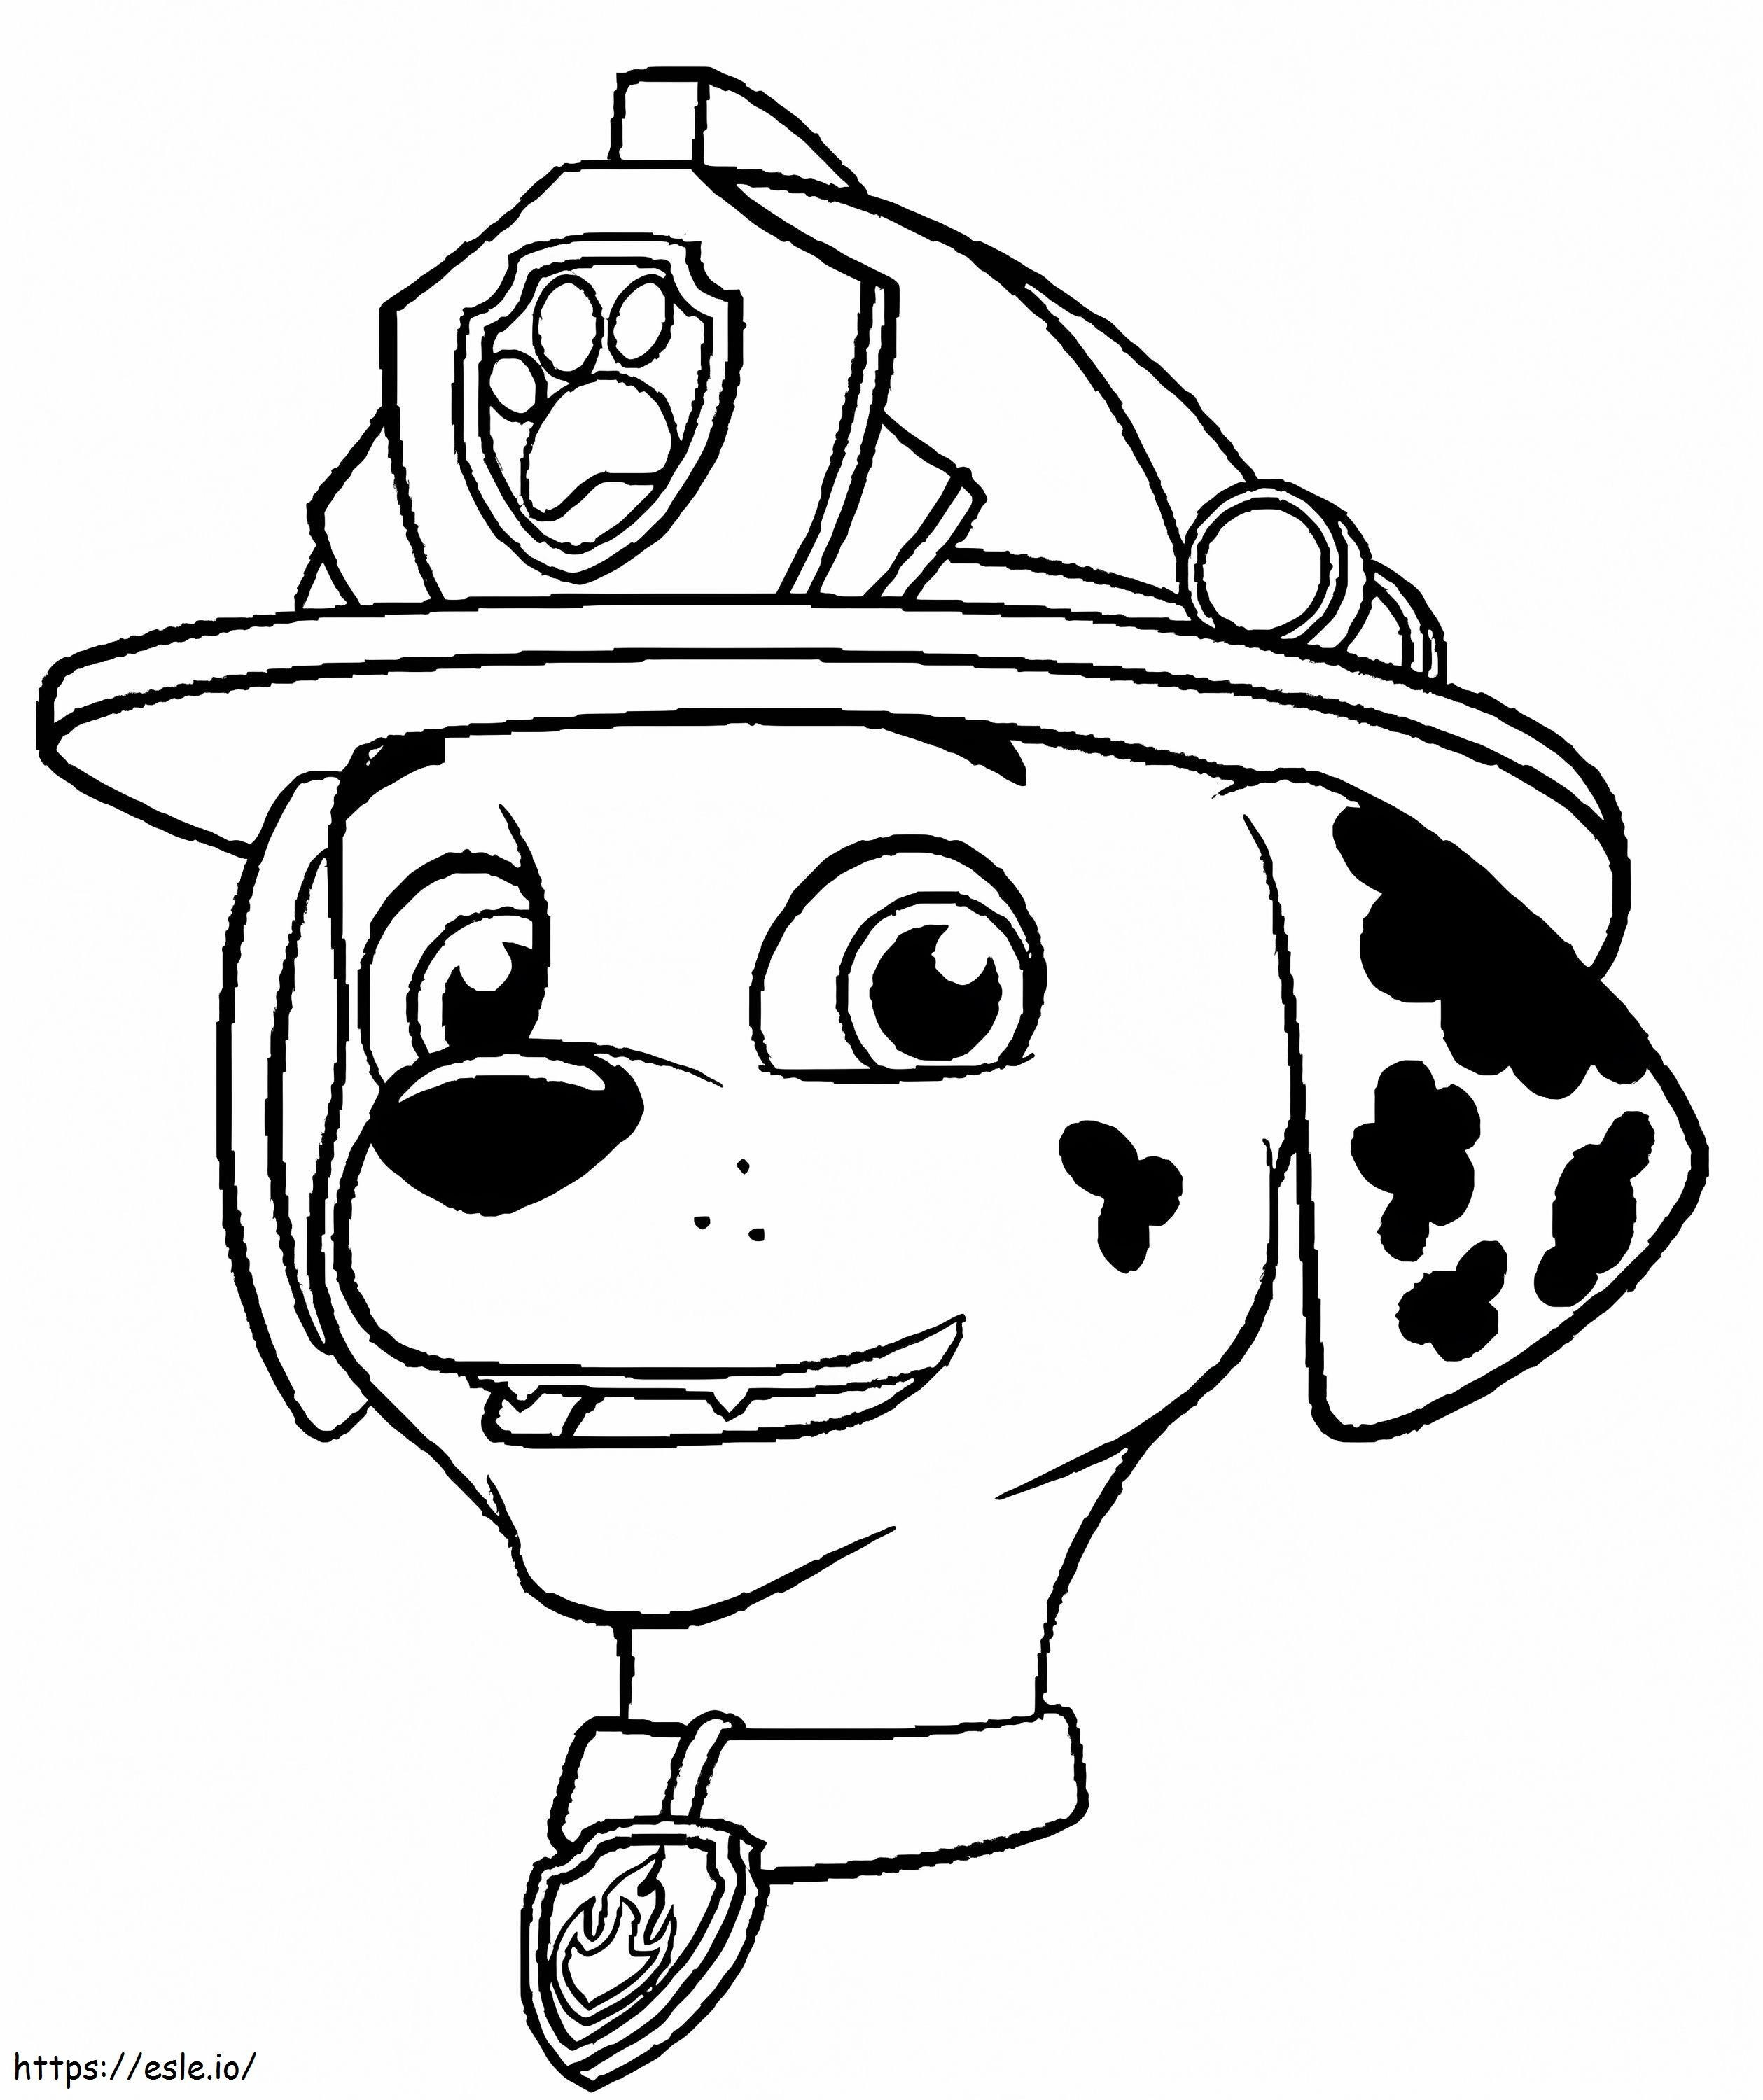 Marshall Head coloring page